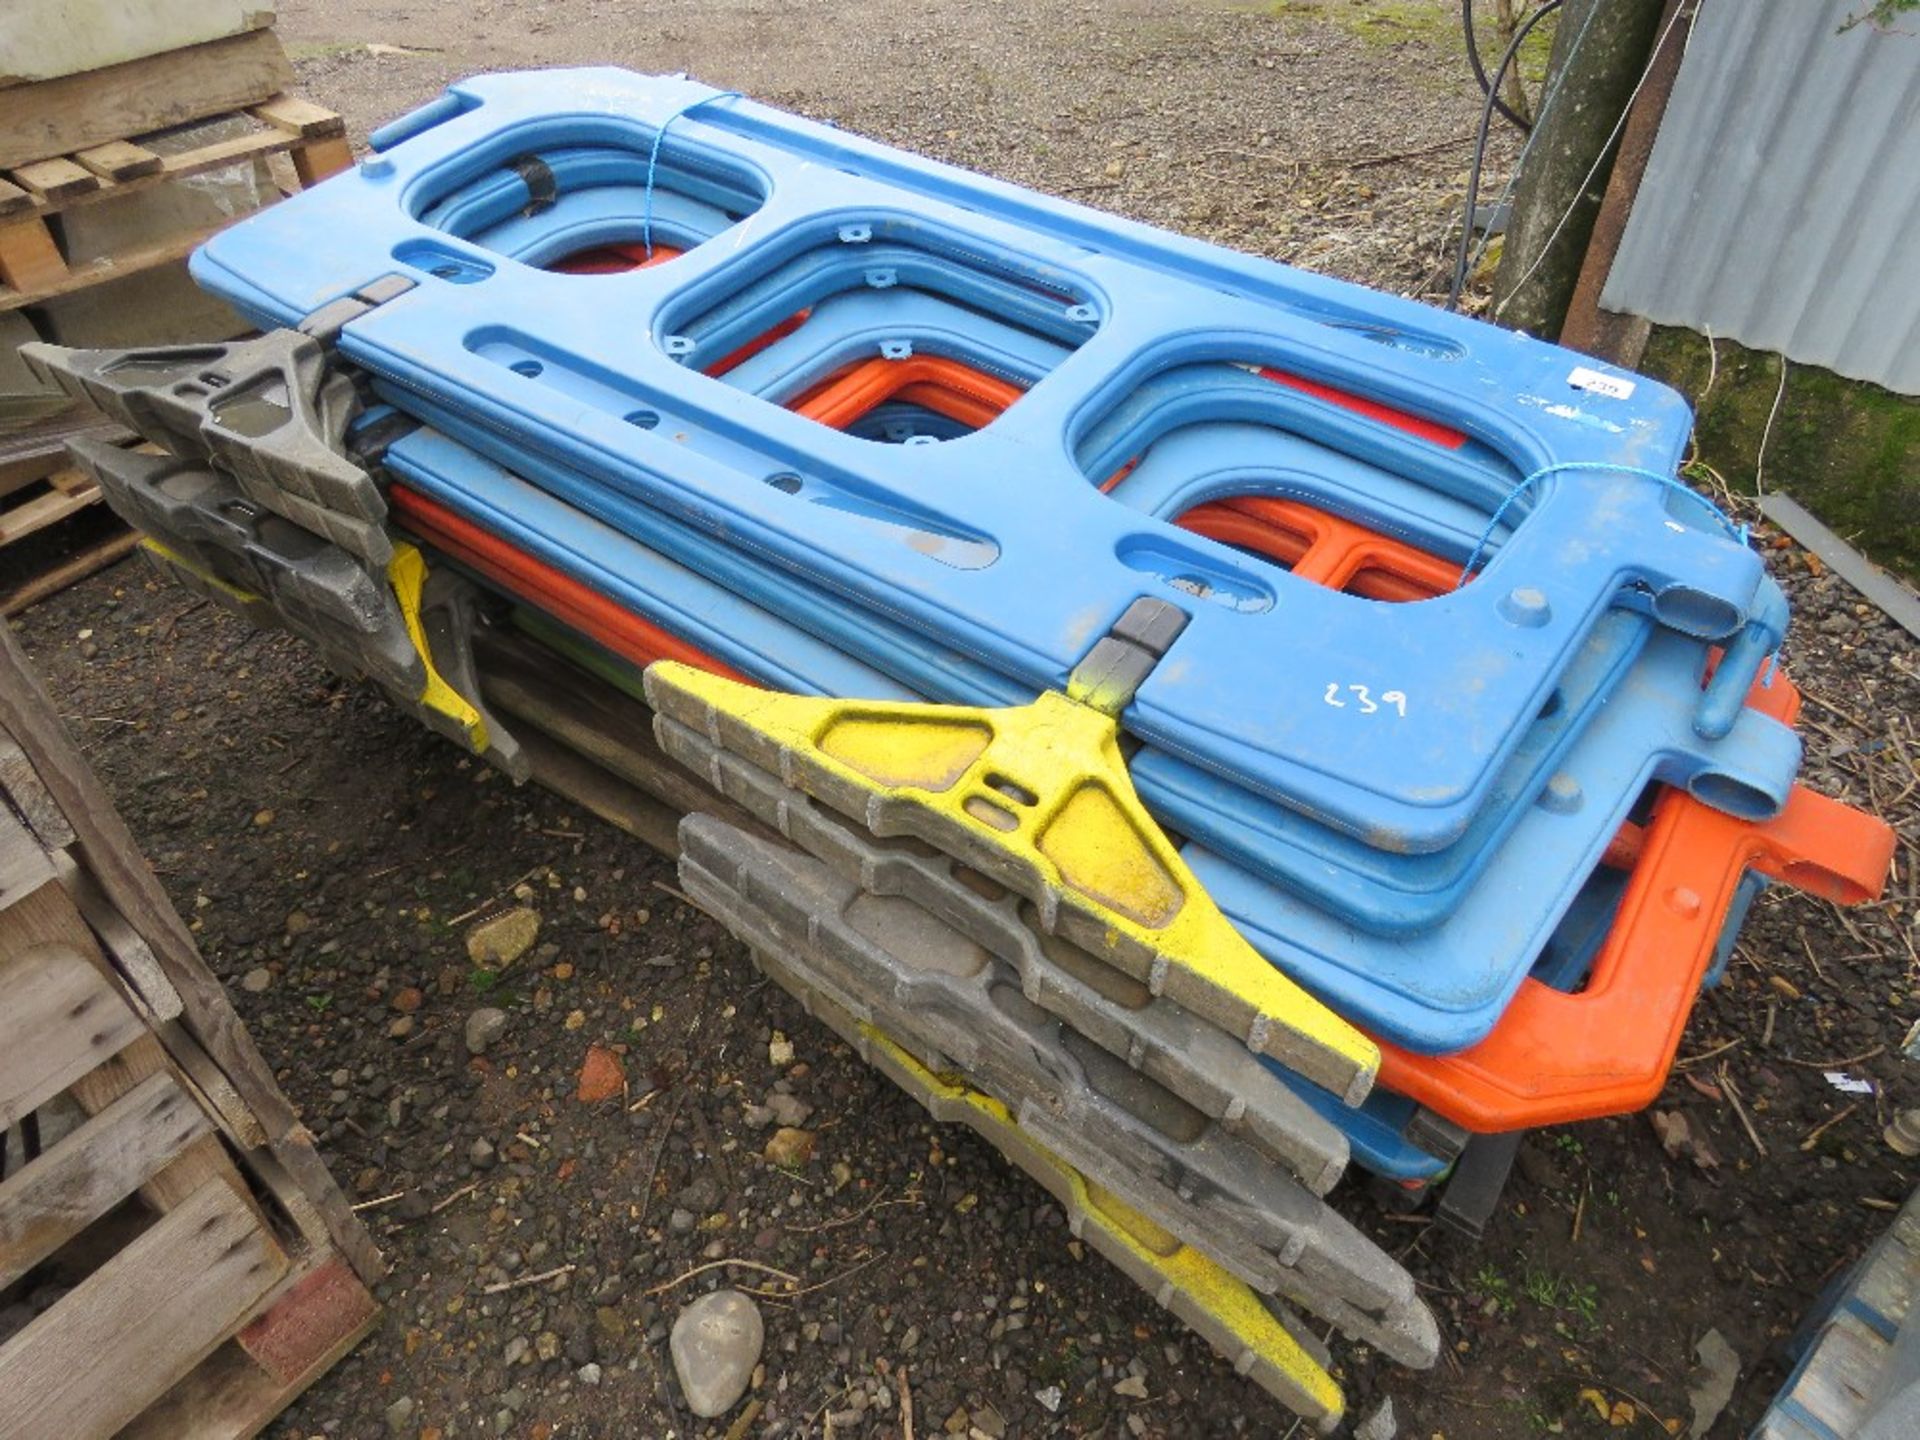 9 X PLASTIC CHAPTER 8 BARRIERS. THIS LOT IS SOLD UNDER THE AUCTIONEERS MARGIN SCHEME, THEREFORE N